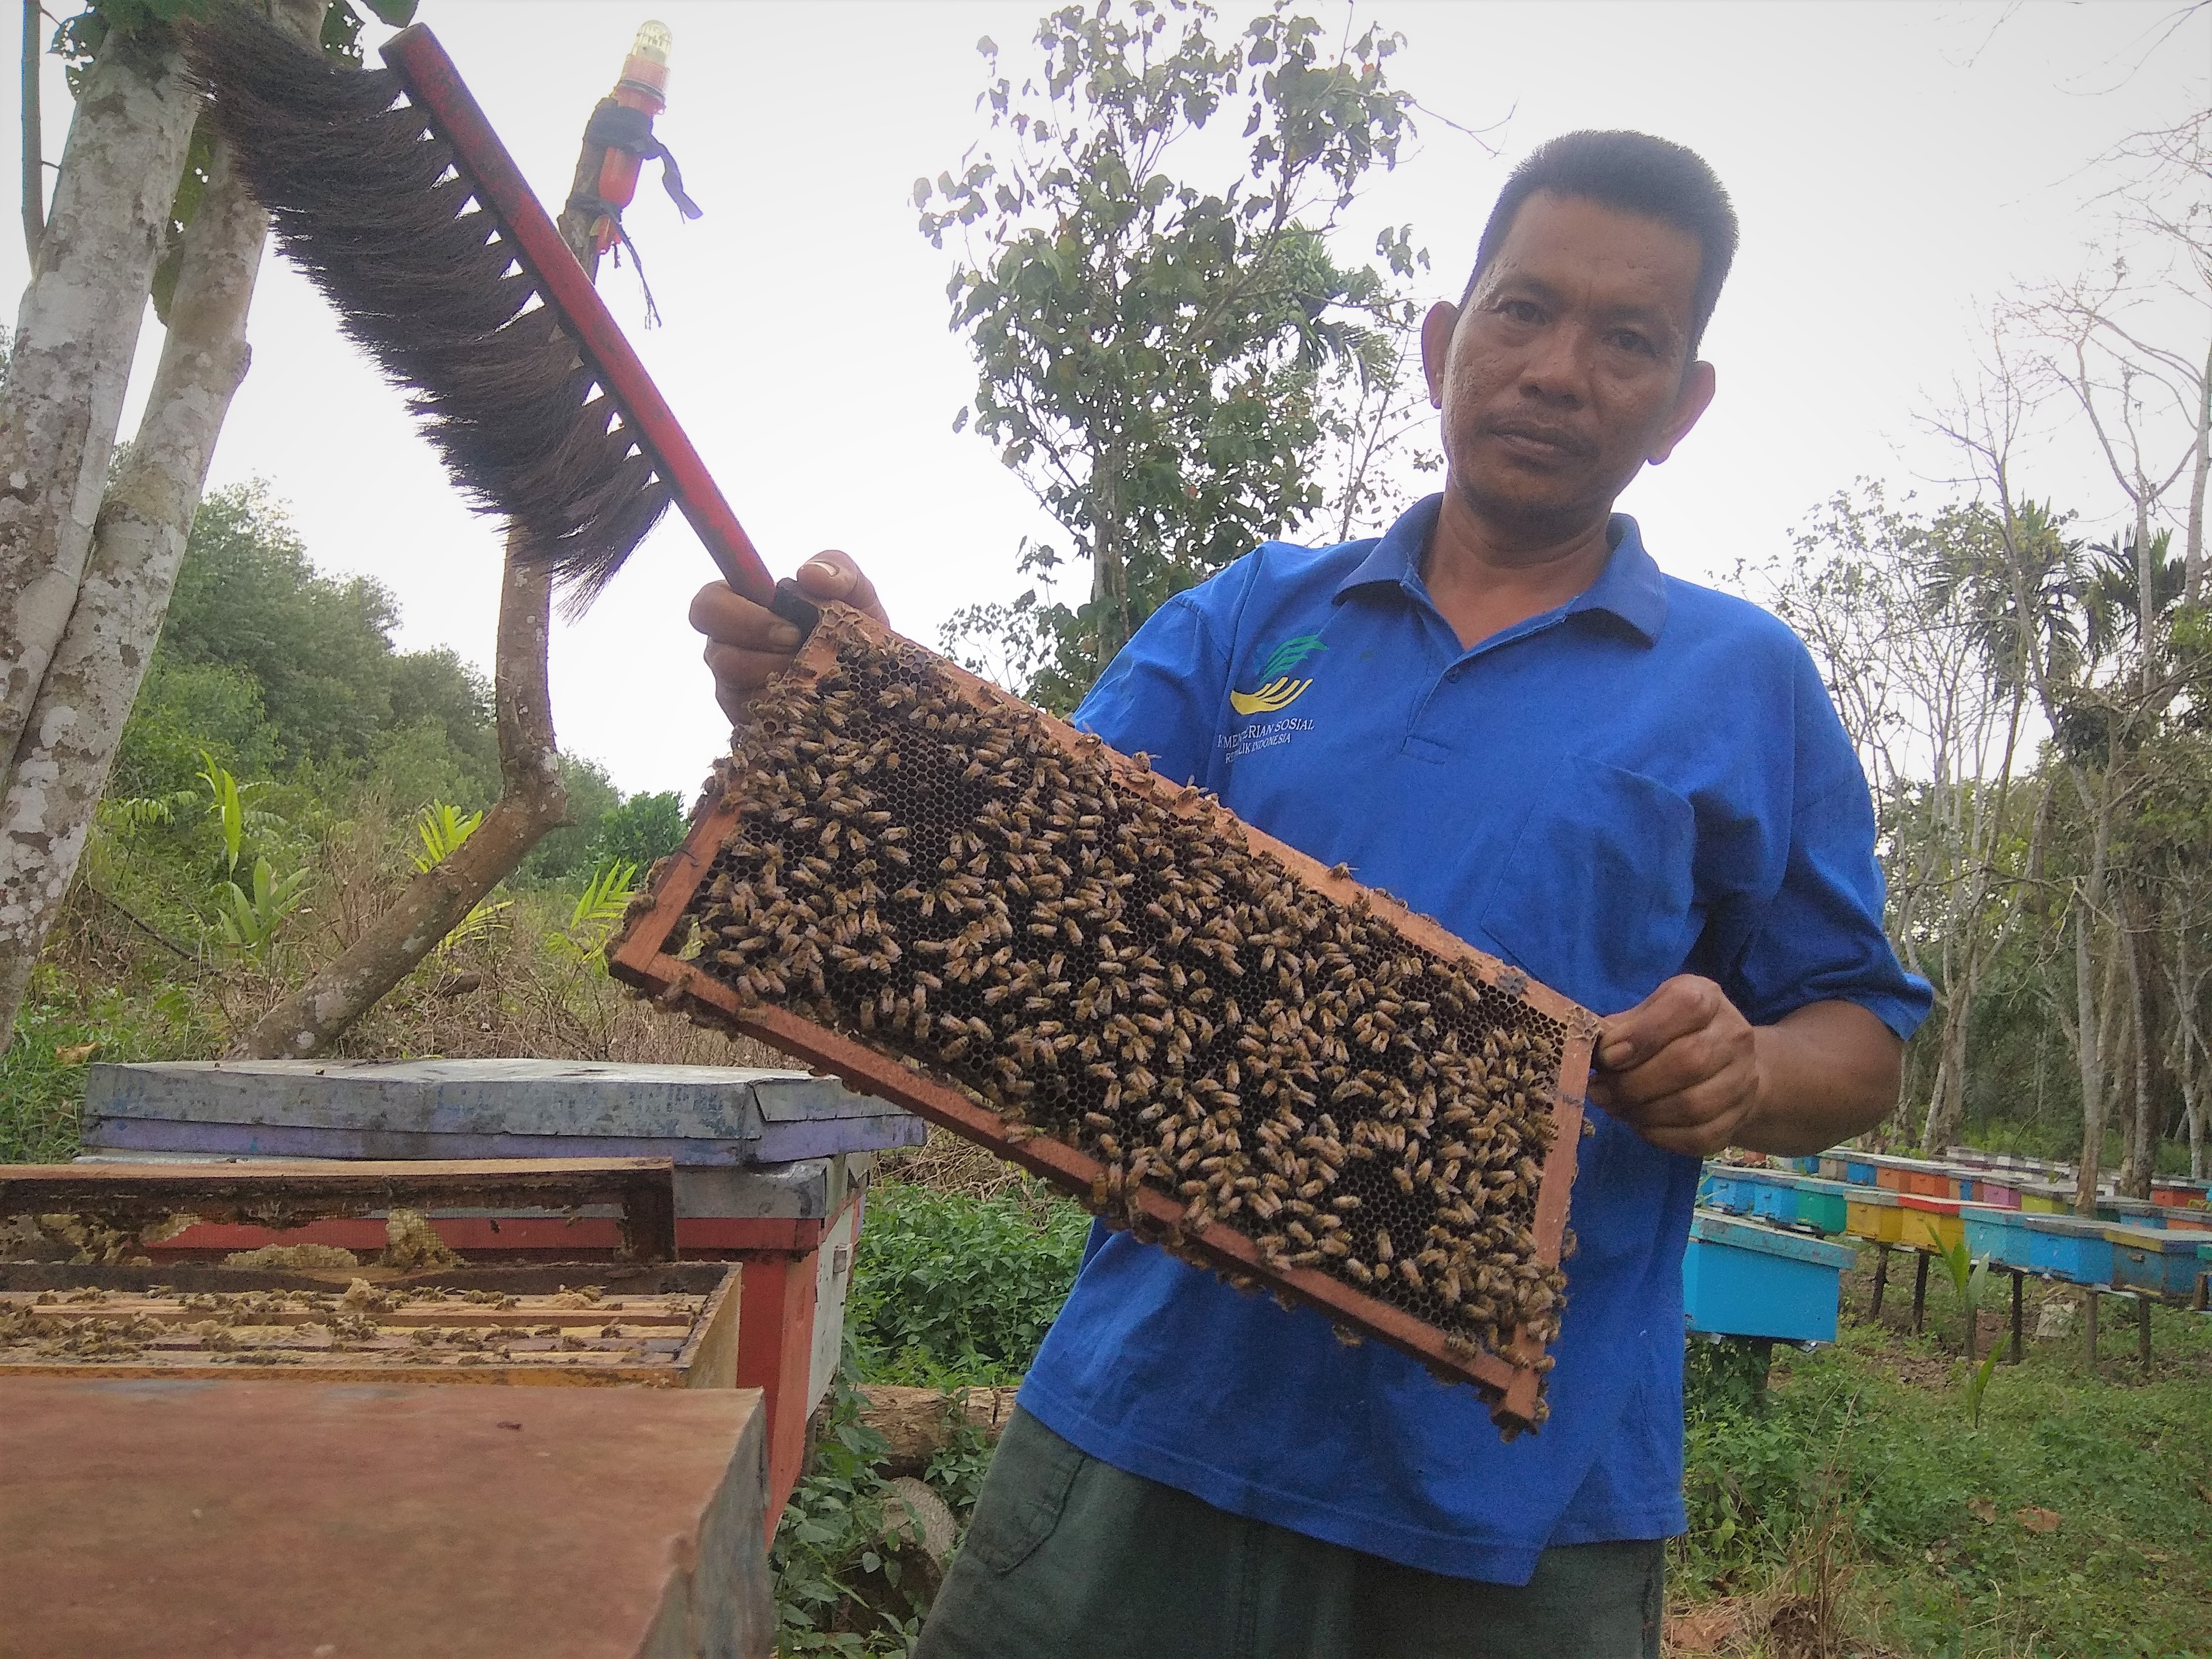 Iwanto, a former logger who has now chosen to become a beekeeper ©Yitno Suprapto